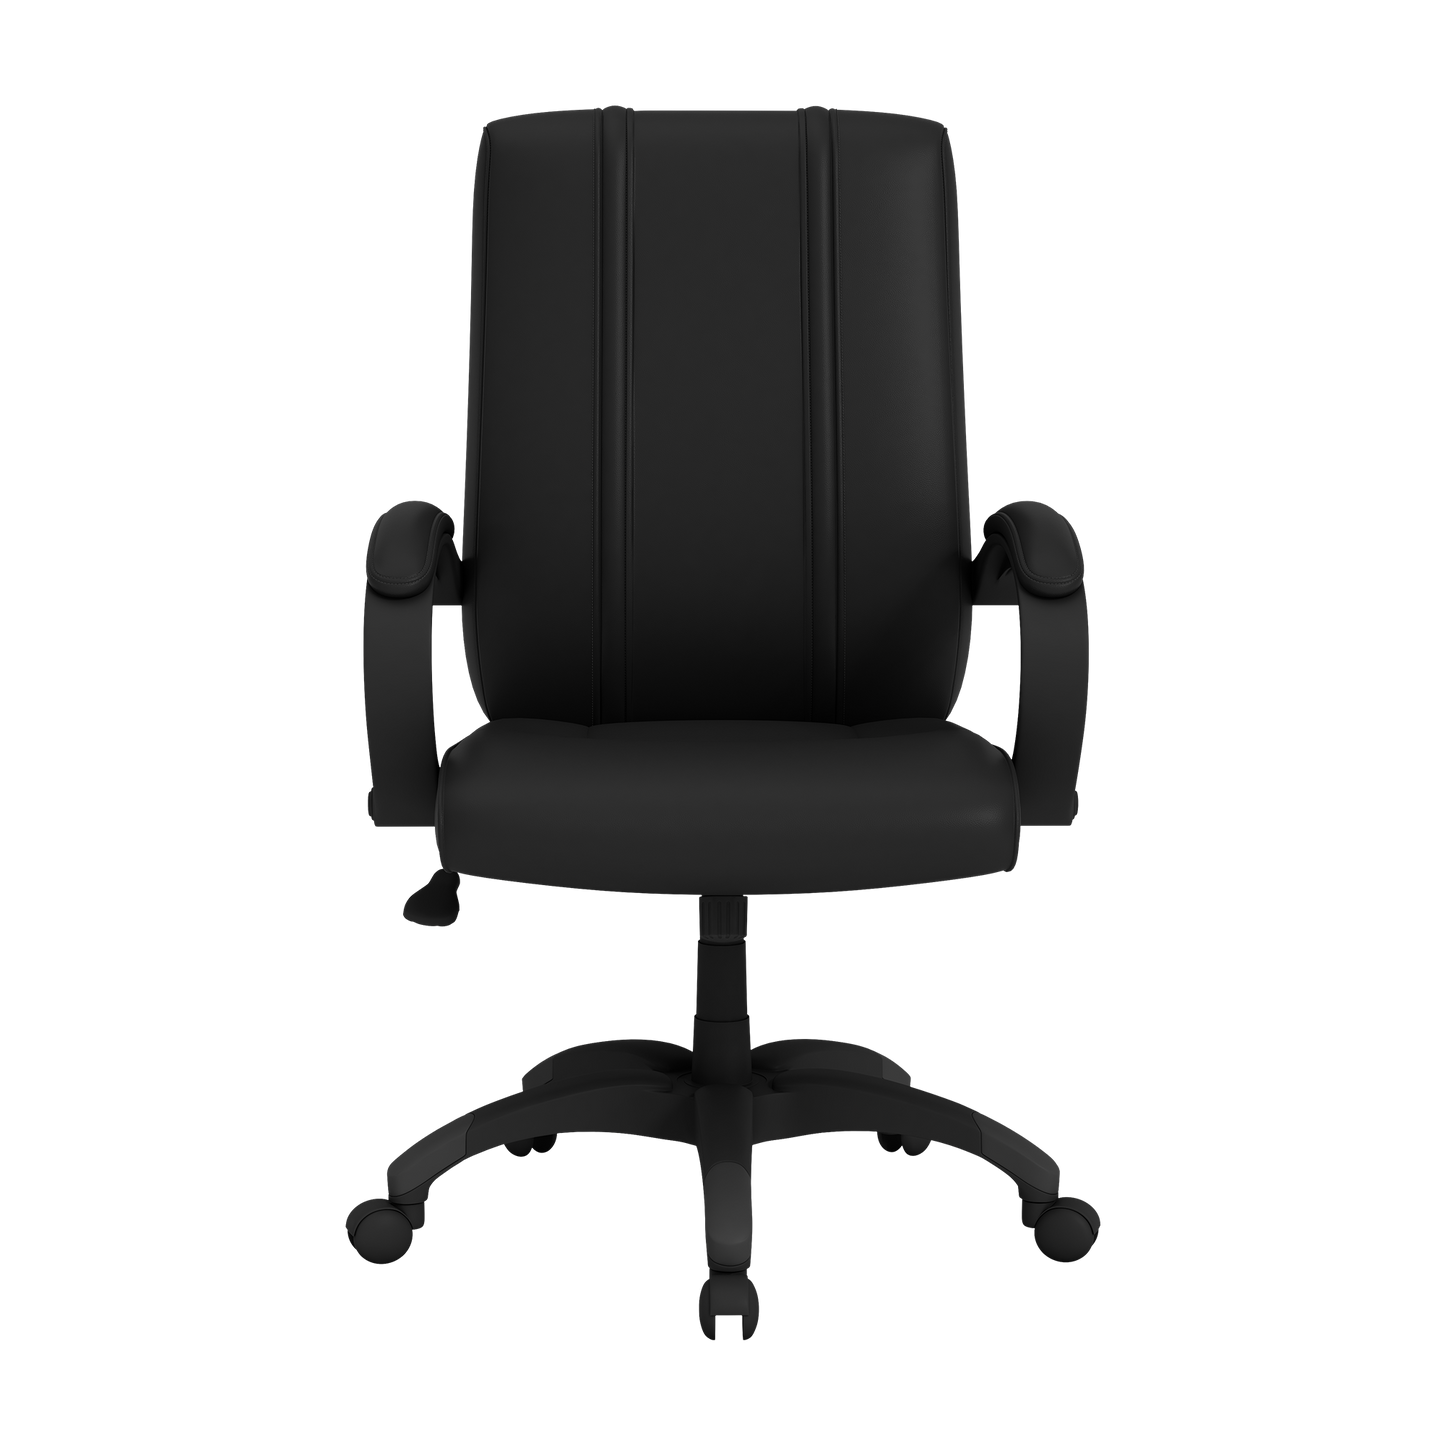 Office Chair 1000 with Nashville SC Secondary Logo